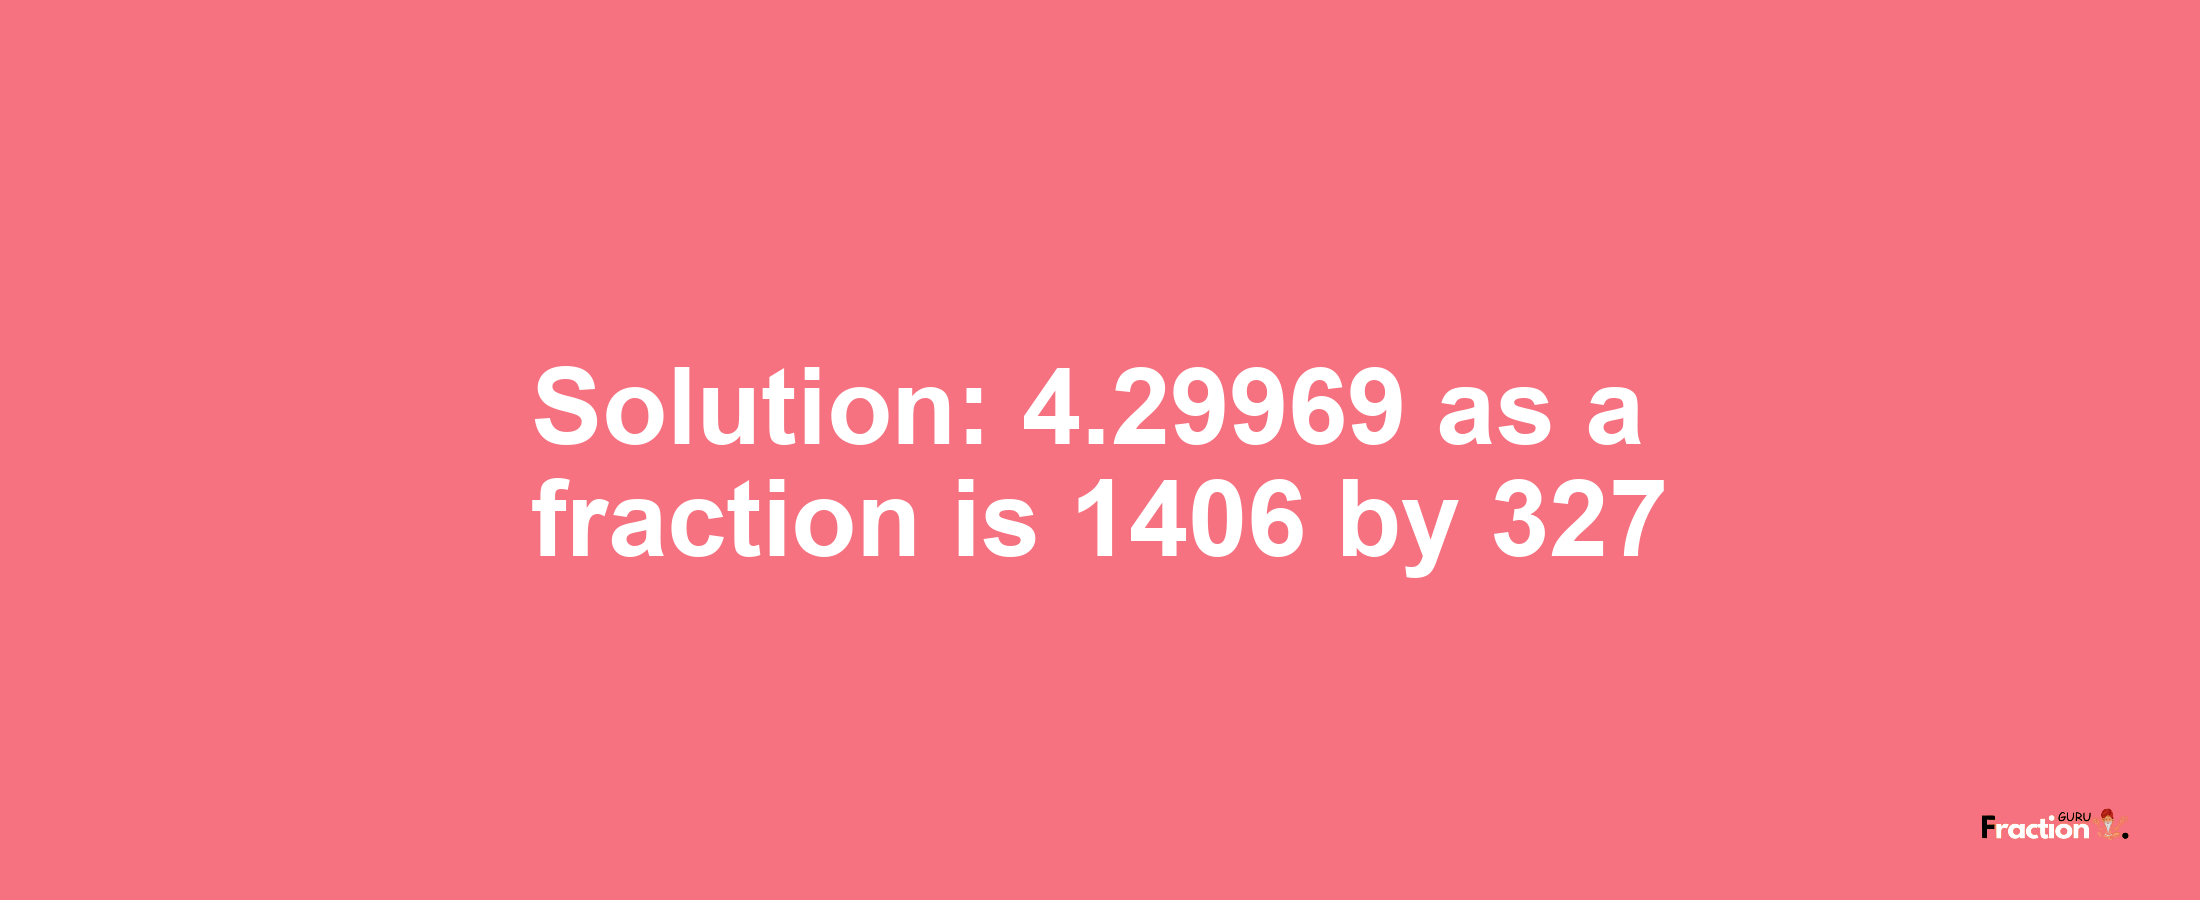 Solution:4.29969 as a fraction is 1406/327